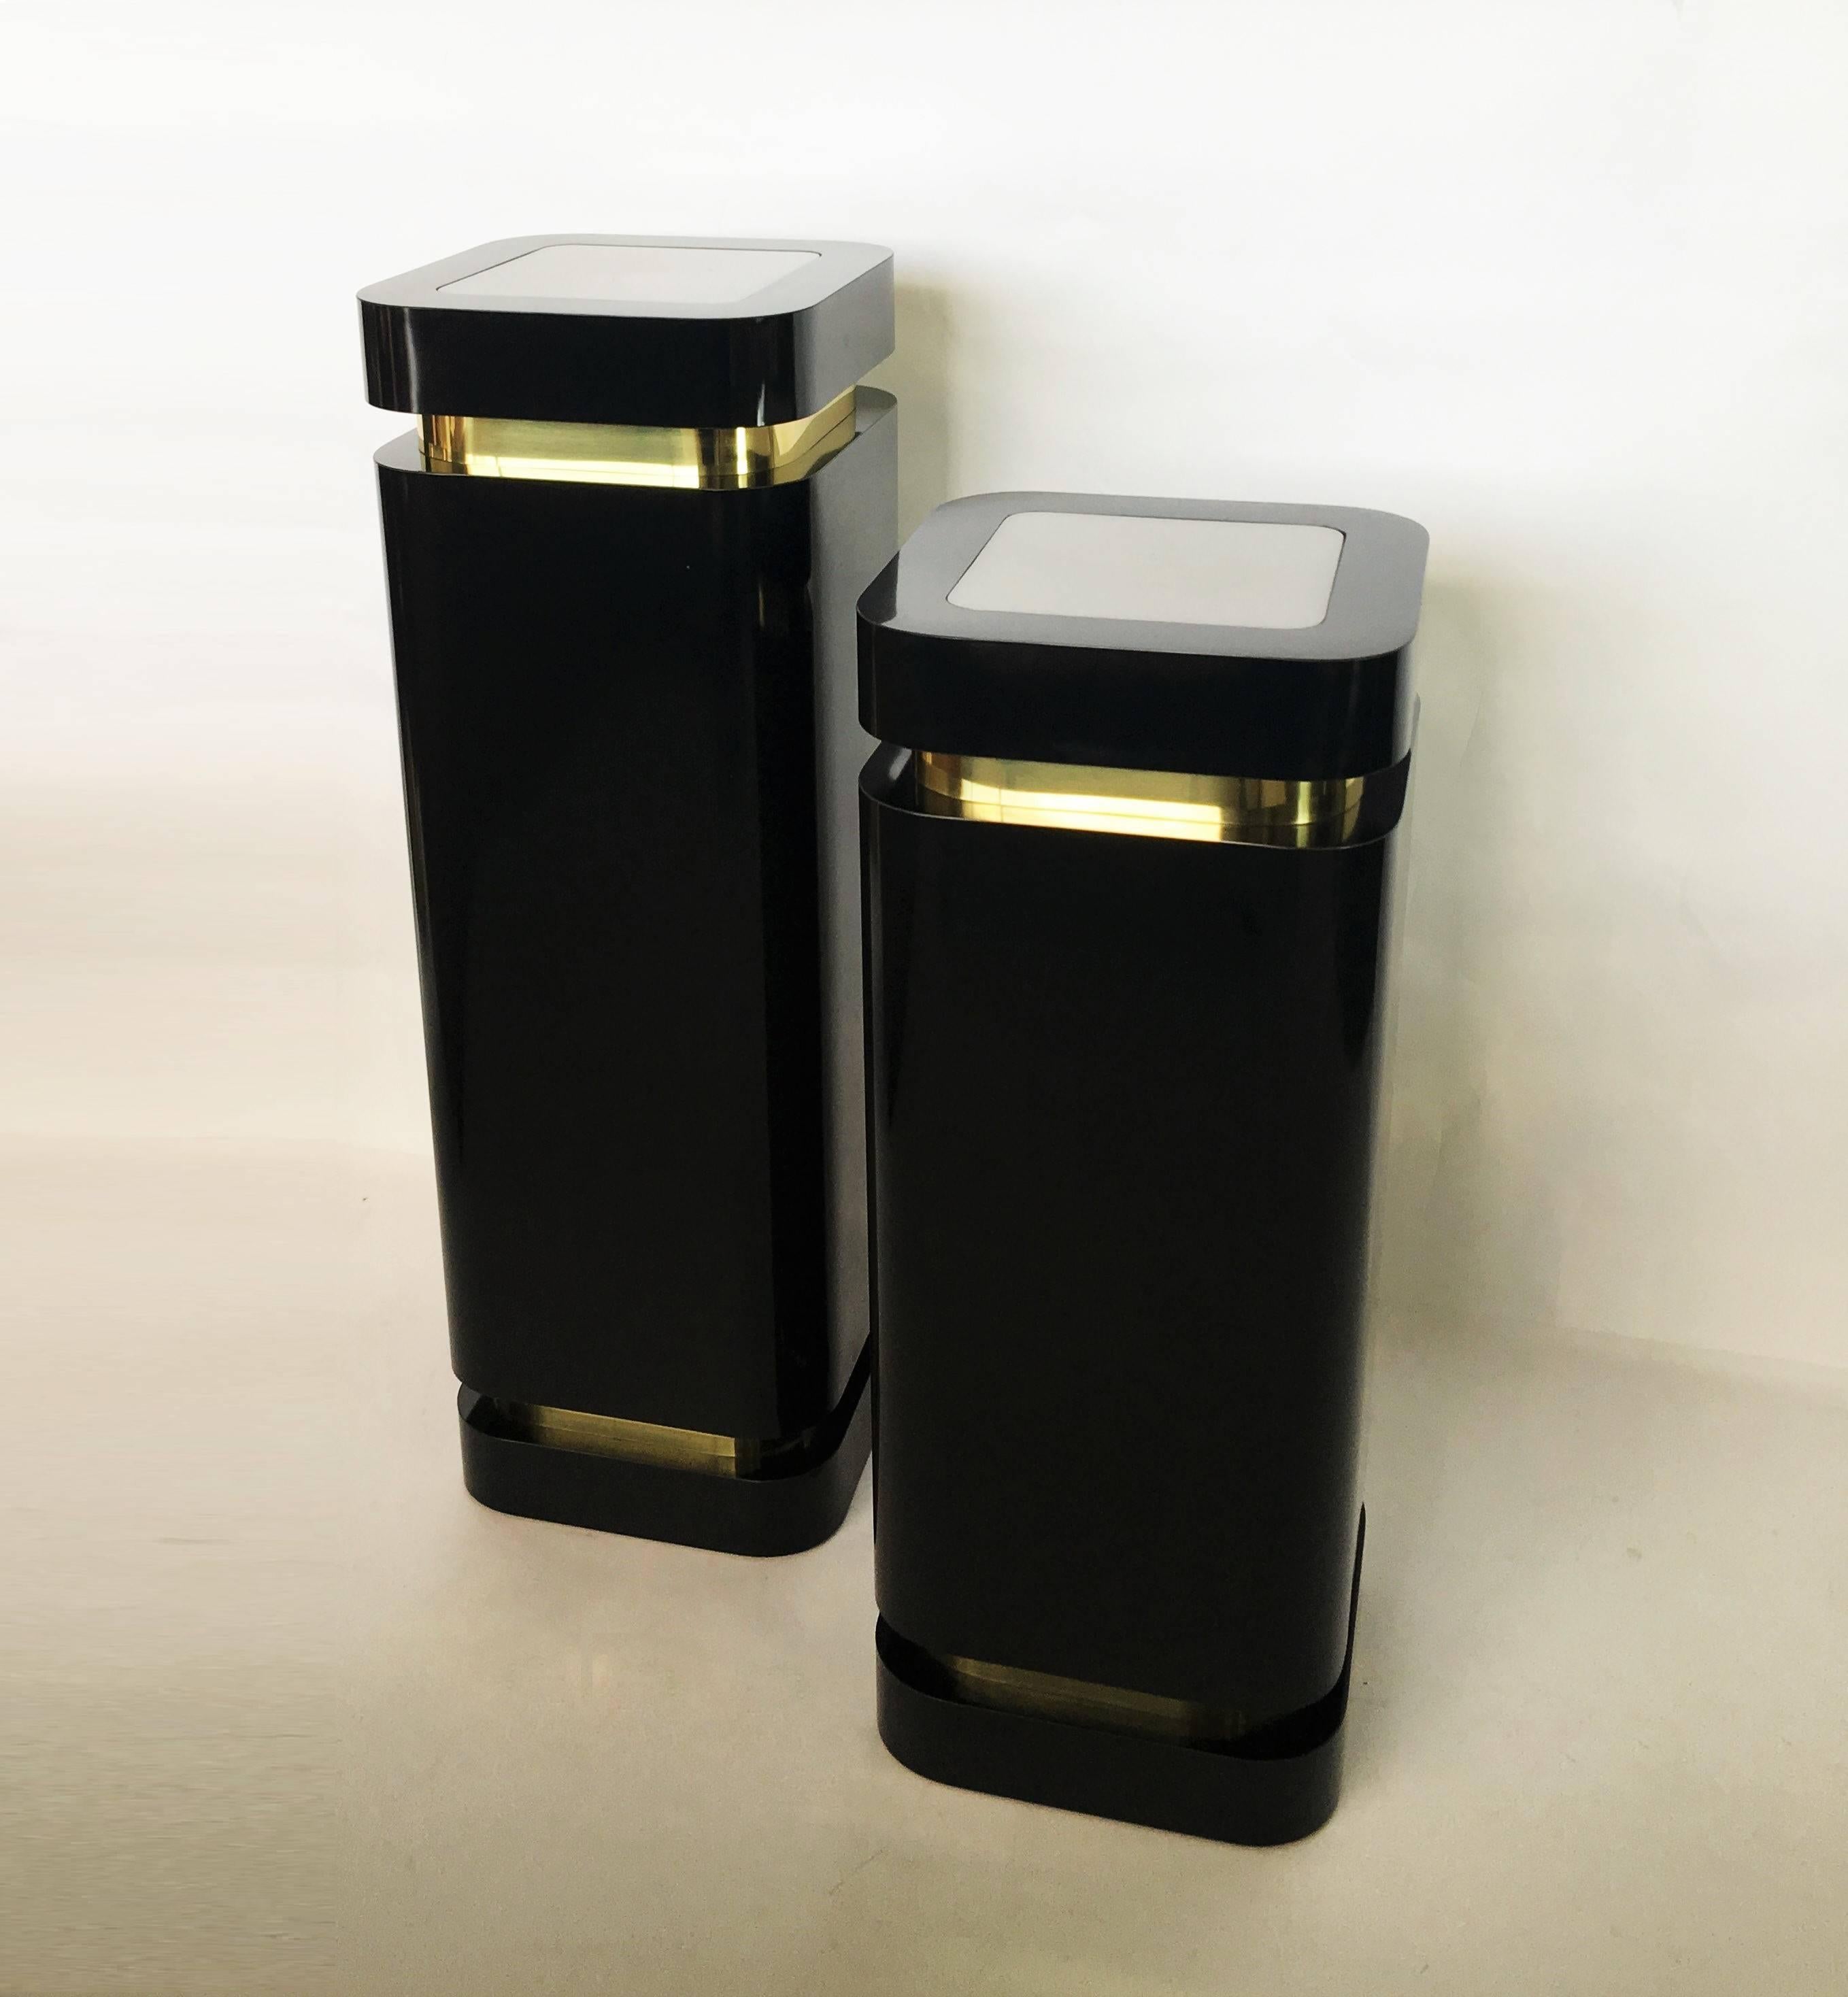 Reminiscent of works by Karl Springer with the signature curved edges and Art Deco inspiration. Two unique black laminate lighted display pedestals with brass trim. Tops with up lights are acrylic plexi-glass in frosted white. One is slightly higher